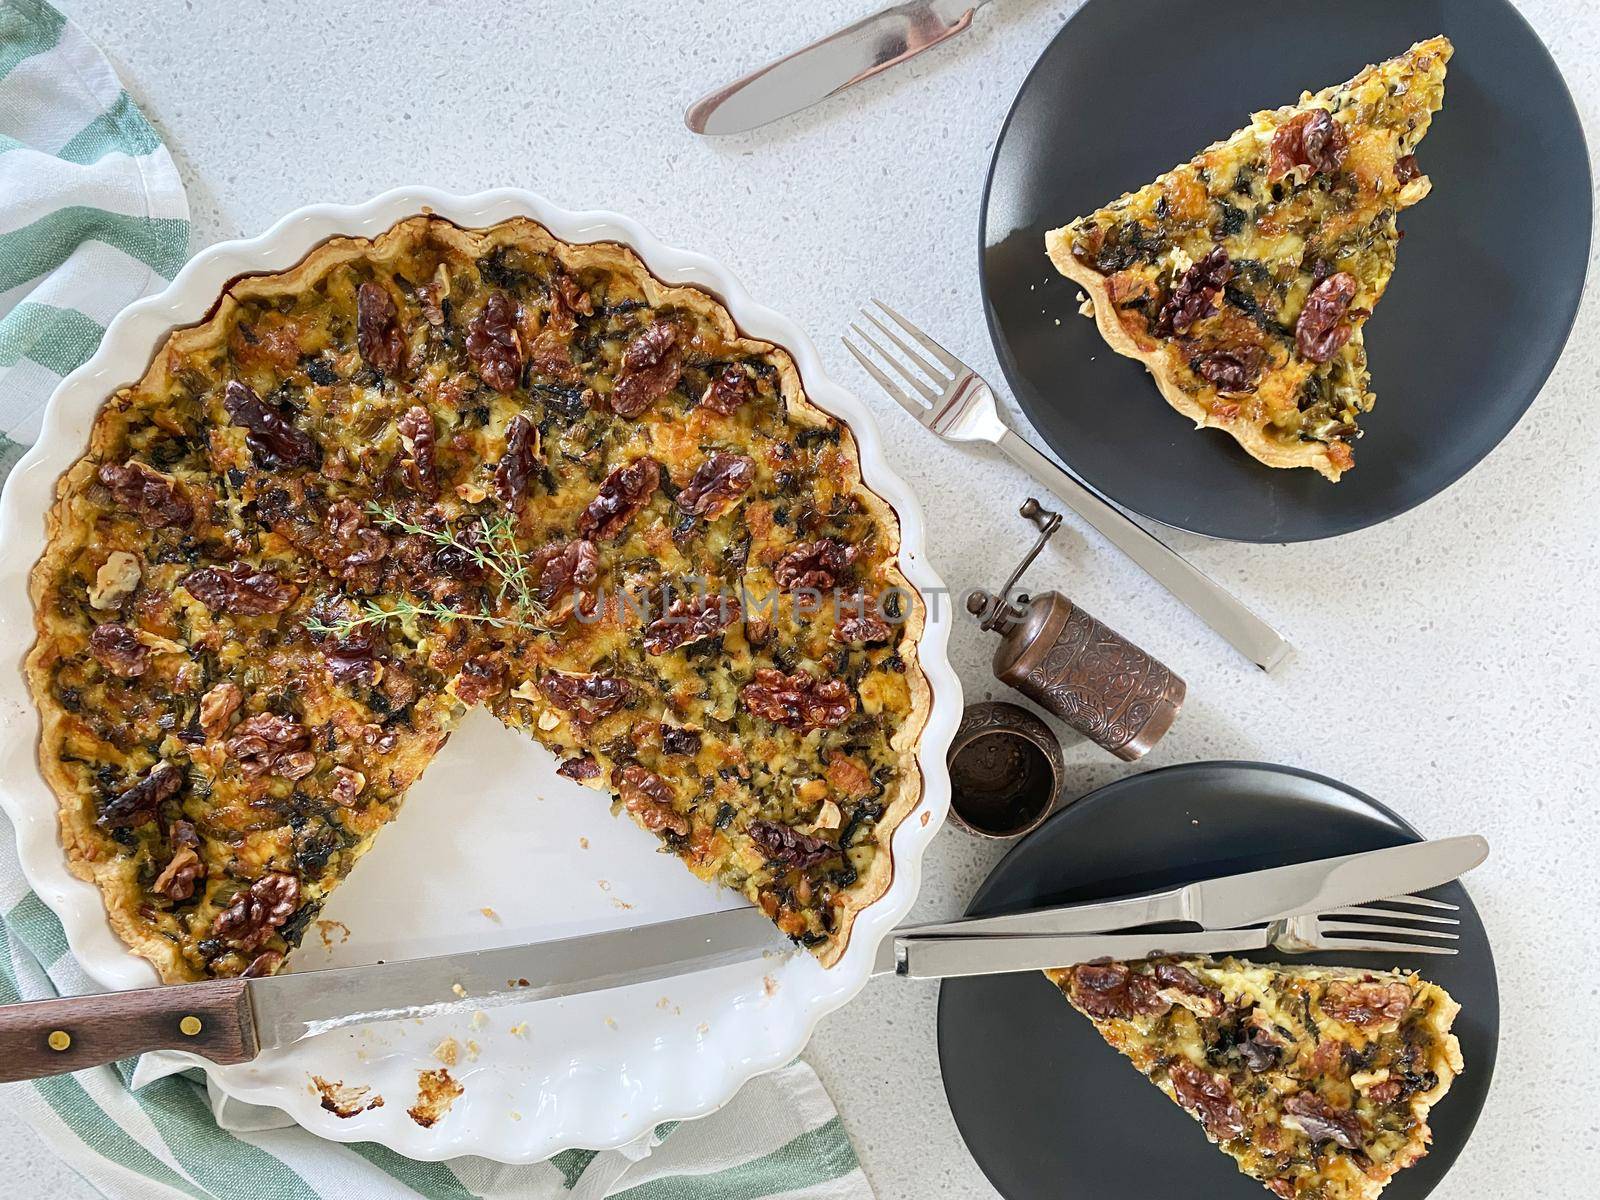 Quiche with ricotta and dried tomatoes in a large white baking dish. Two dark plates with portioned pieces of quiche, cutlery